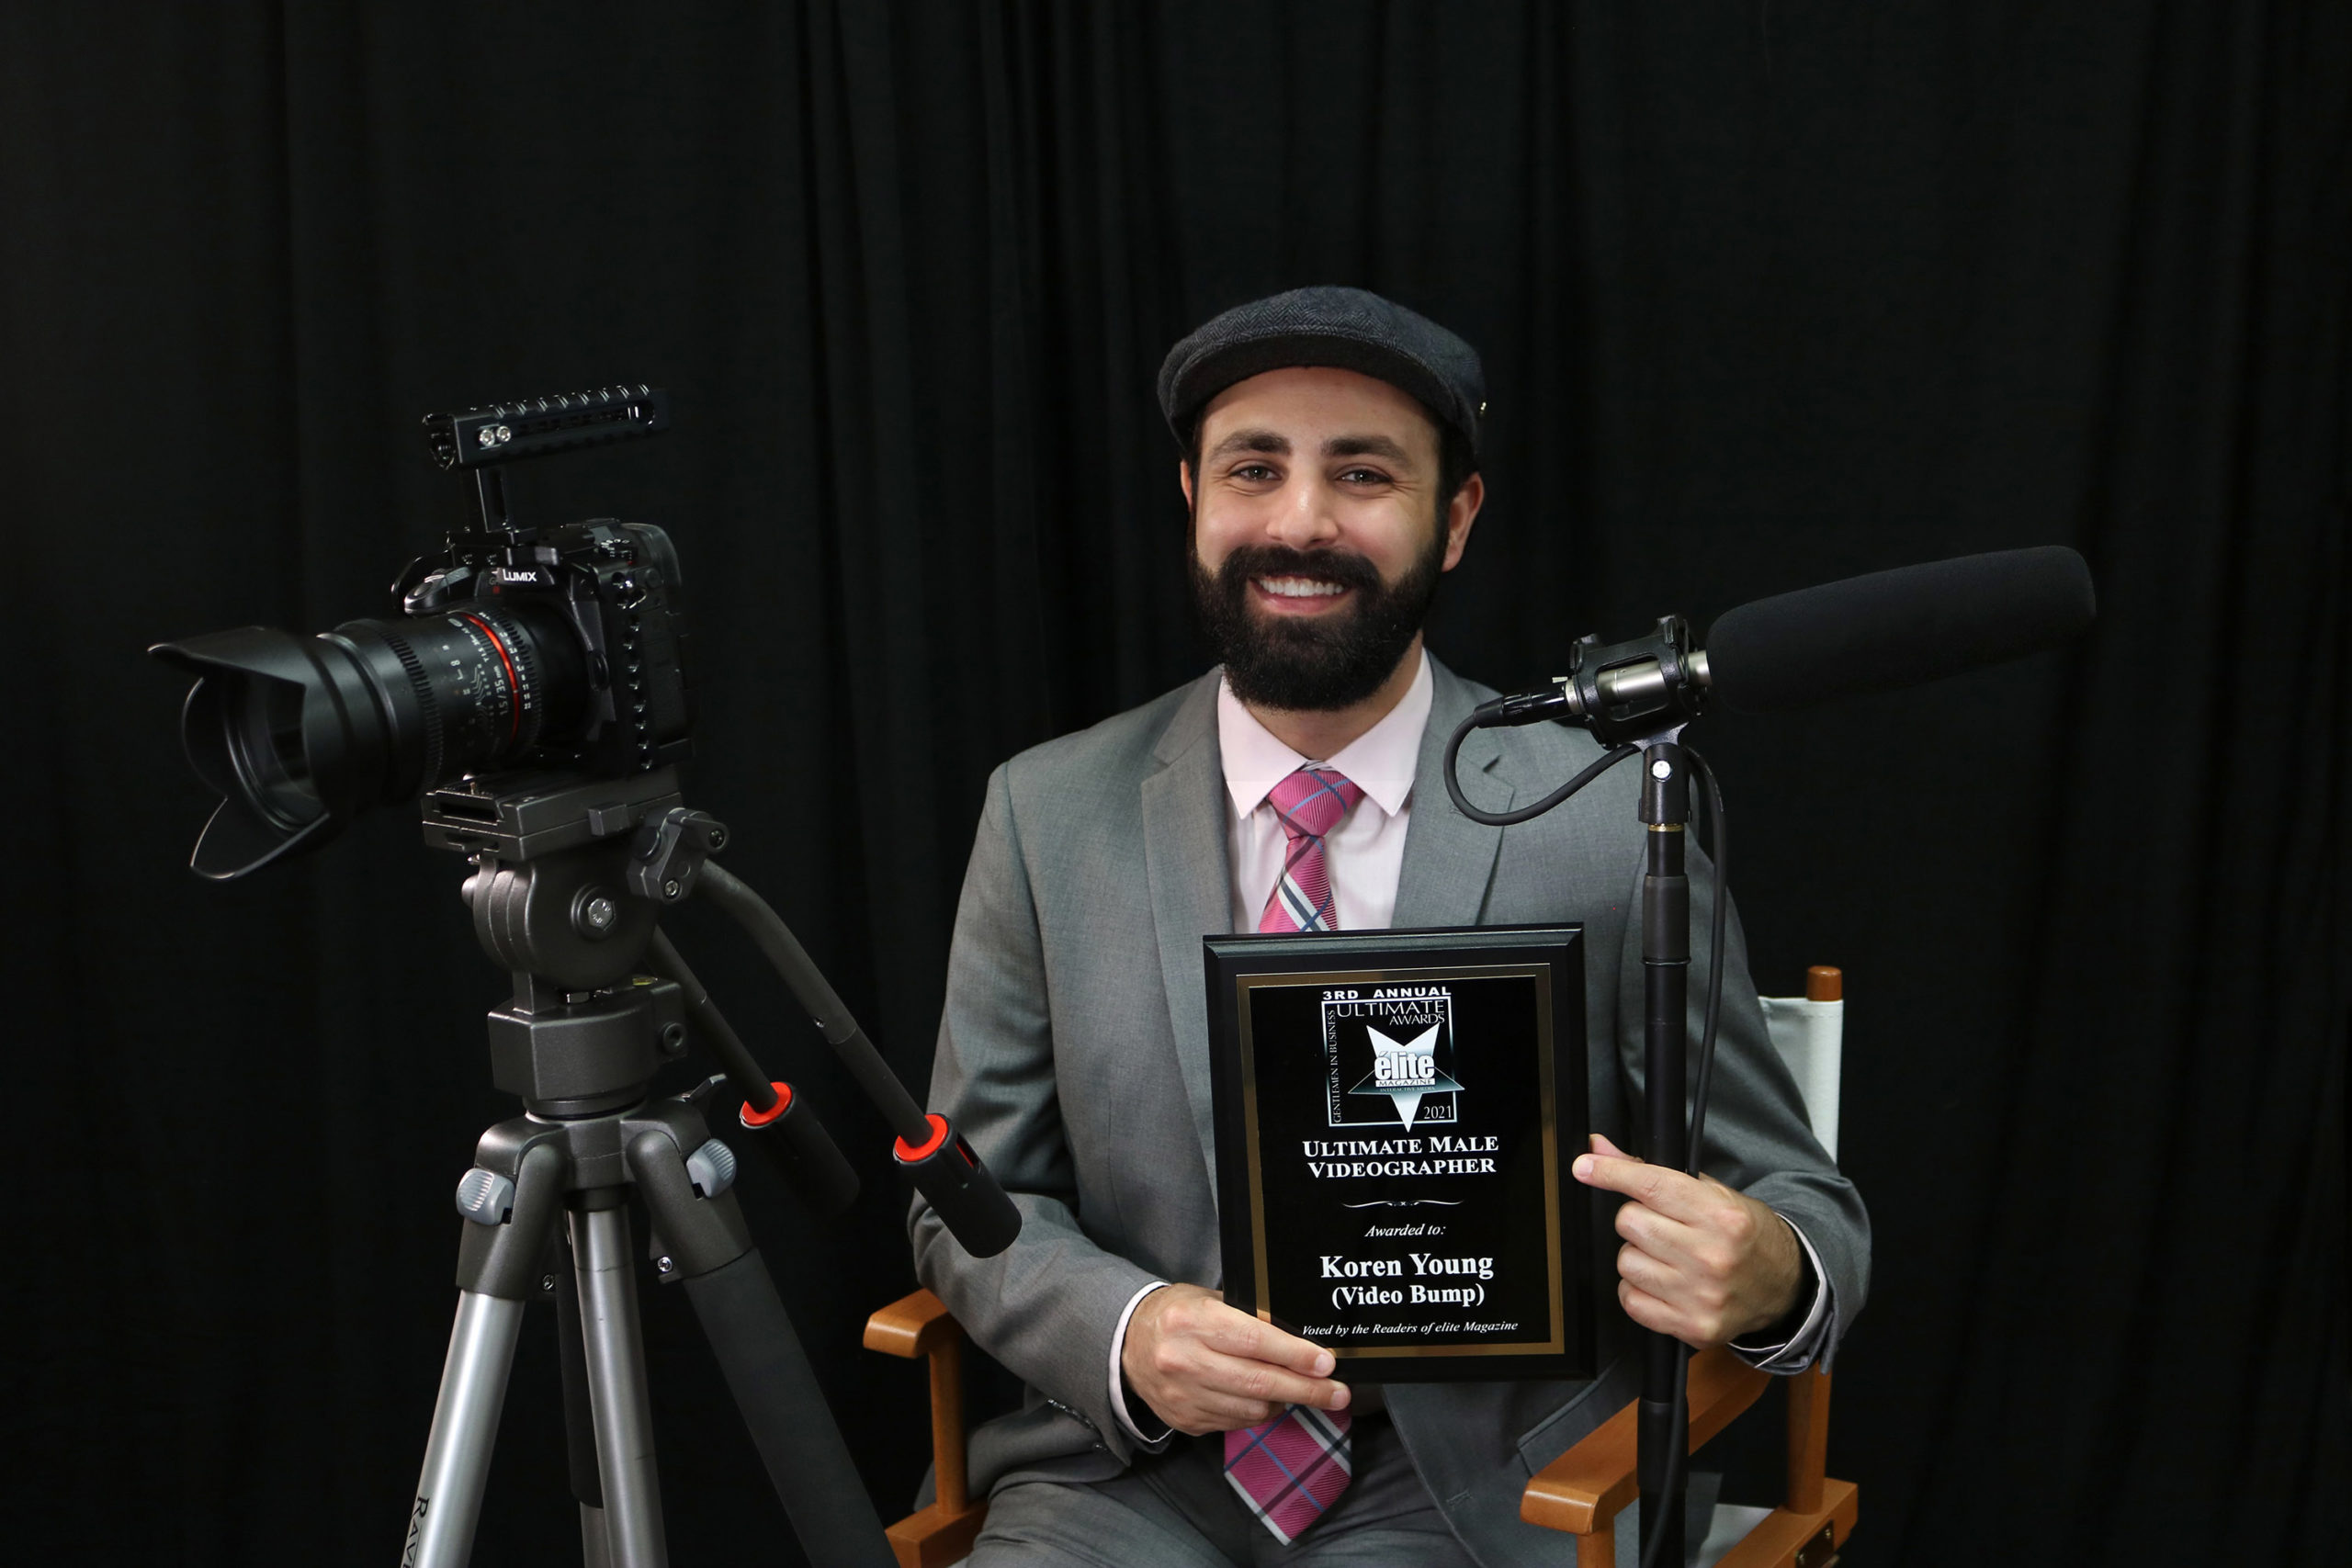 Koren Young with his Ultimate Male Videographer award from SCV elite Magazine